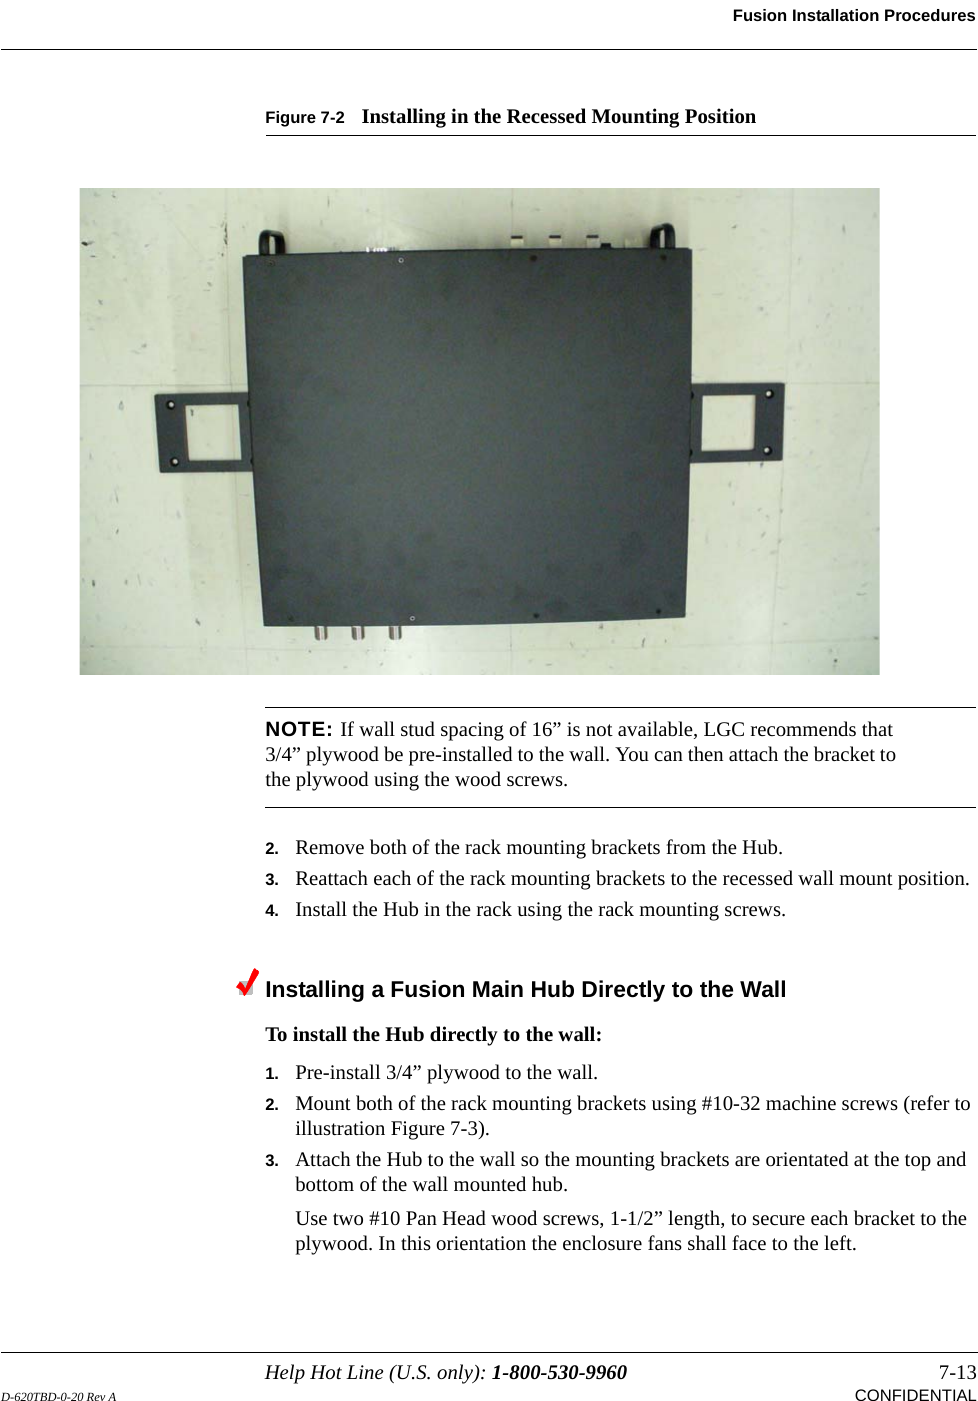 Help Hot Line (U.S. only): 1-800-530-9960 7-13D-620TBD-0-20 Rev A CONFIDENTIALFusion Installation ProceduresFigure 7-2 Installing in the Recessed Mounting PositionNOTE: If wall stud spacing of 16” is not available, LGC recommends that 3/4” plywood be pre-installed to the wall. You can then attach the bracket to the plywood using the wood screws.2. Remove both of the rack mounting brackets from the Hub.3. Reattach each of the rack mounting brackets to the recessed wall mount position.4. Install the Hub in the rack using the rack mounting screws.Installing a Fusion Main Hub Directly to the Wall To install the Hub directly to the wall:1. Pre-install 3/4” plywood to the wall.2. Mount both of the rack mounting brackets using #10-32 machine screws (refer to illustration Figure 7-3).3. Attach the Hub to the wall so the mounting brackets are orientated at the top and bottom of the wall mounted hub. Use two #10 Pan Head wood screws, 1-1/2” length, to secure each bracket to the plywood. In this orientation the enclosure fans shall face to the left.